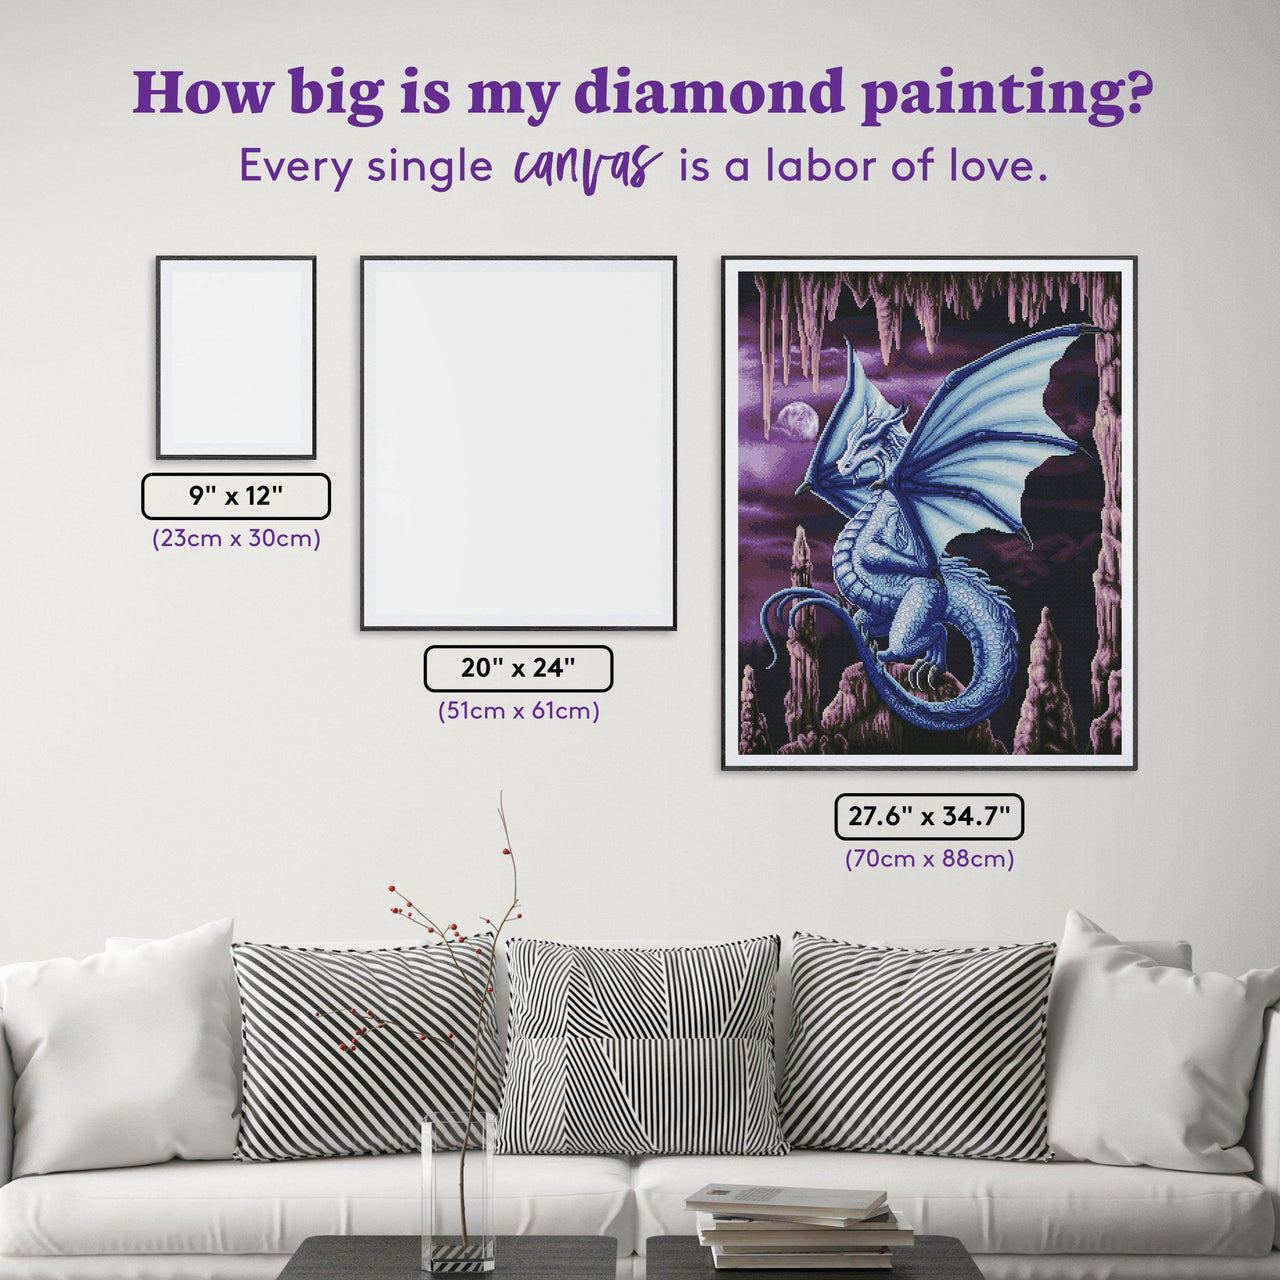 Diamond Painting Violet 27.6" x 34.7″ (70cm x 88cm) / Square with 31 Colors including 4 ABs / 96,673